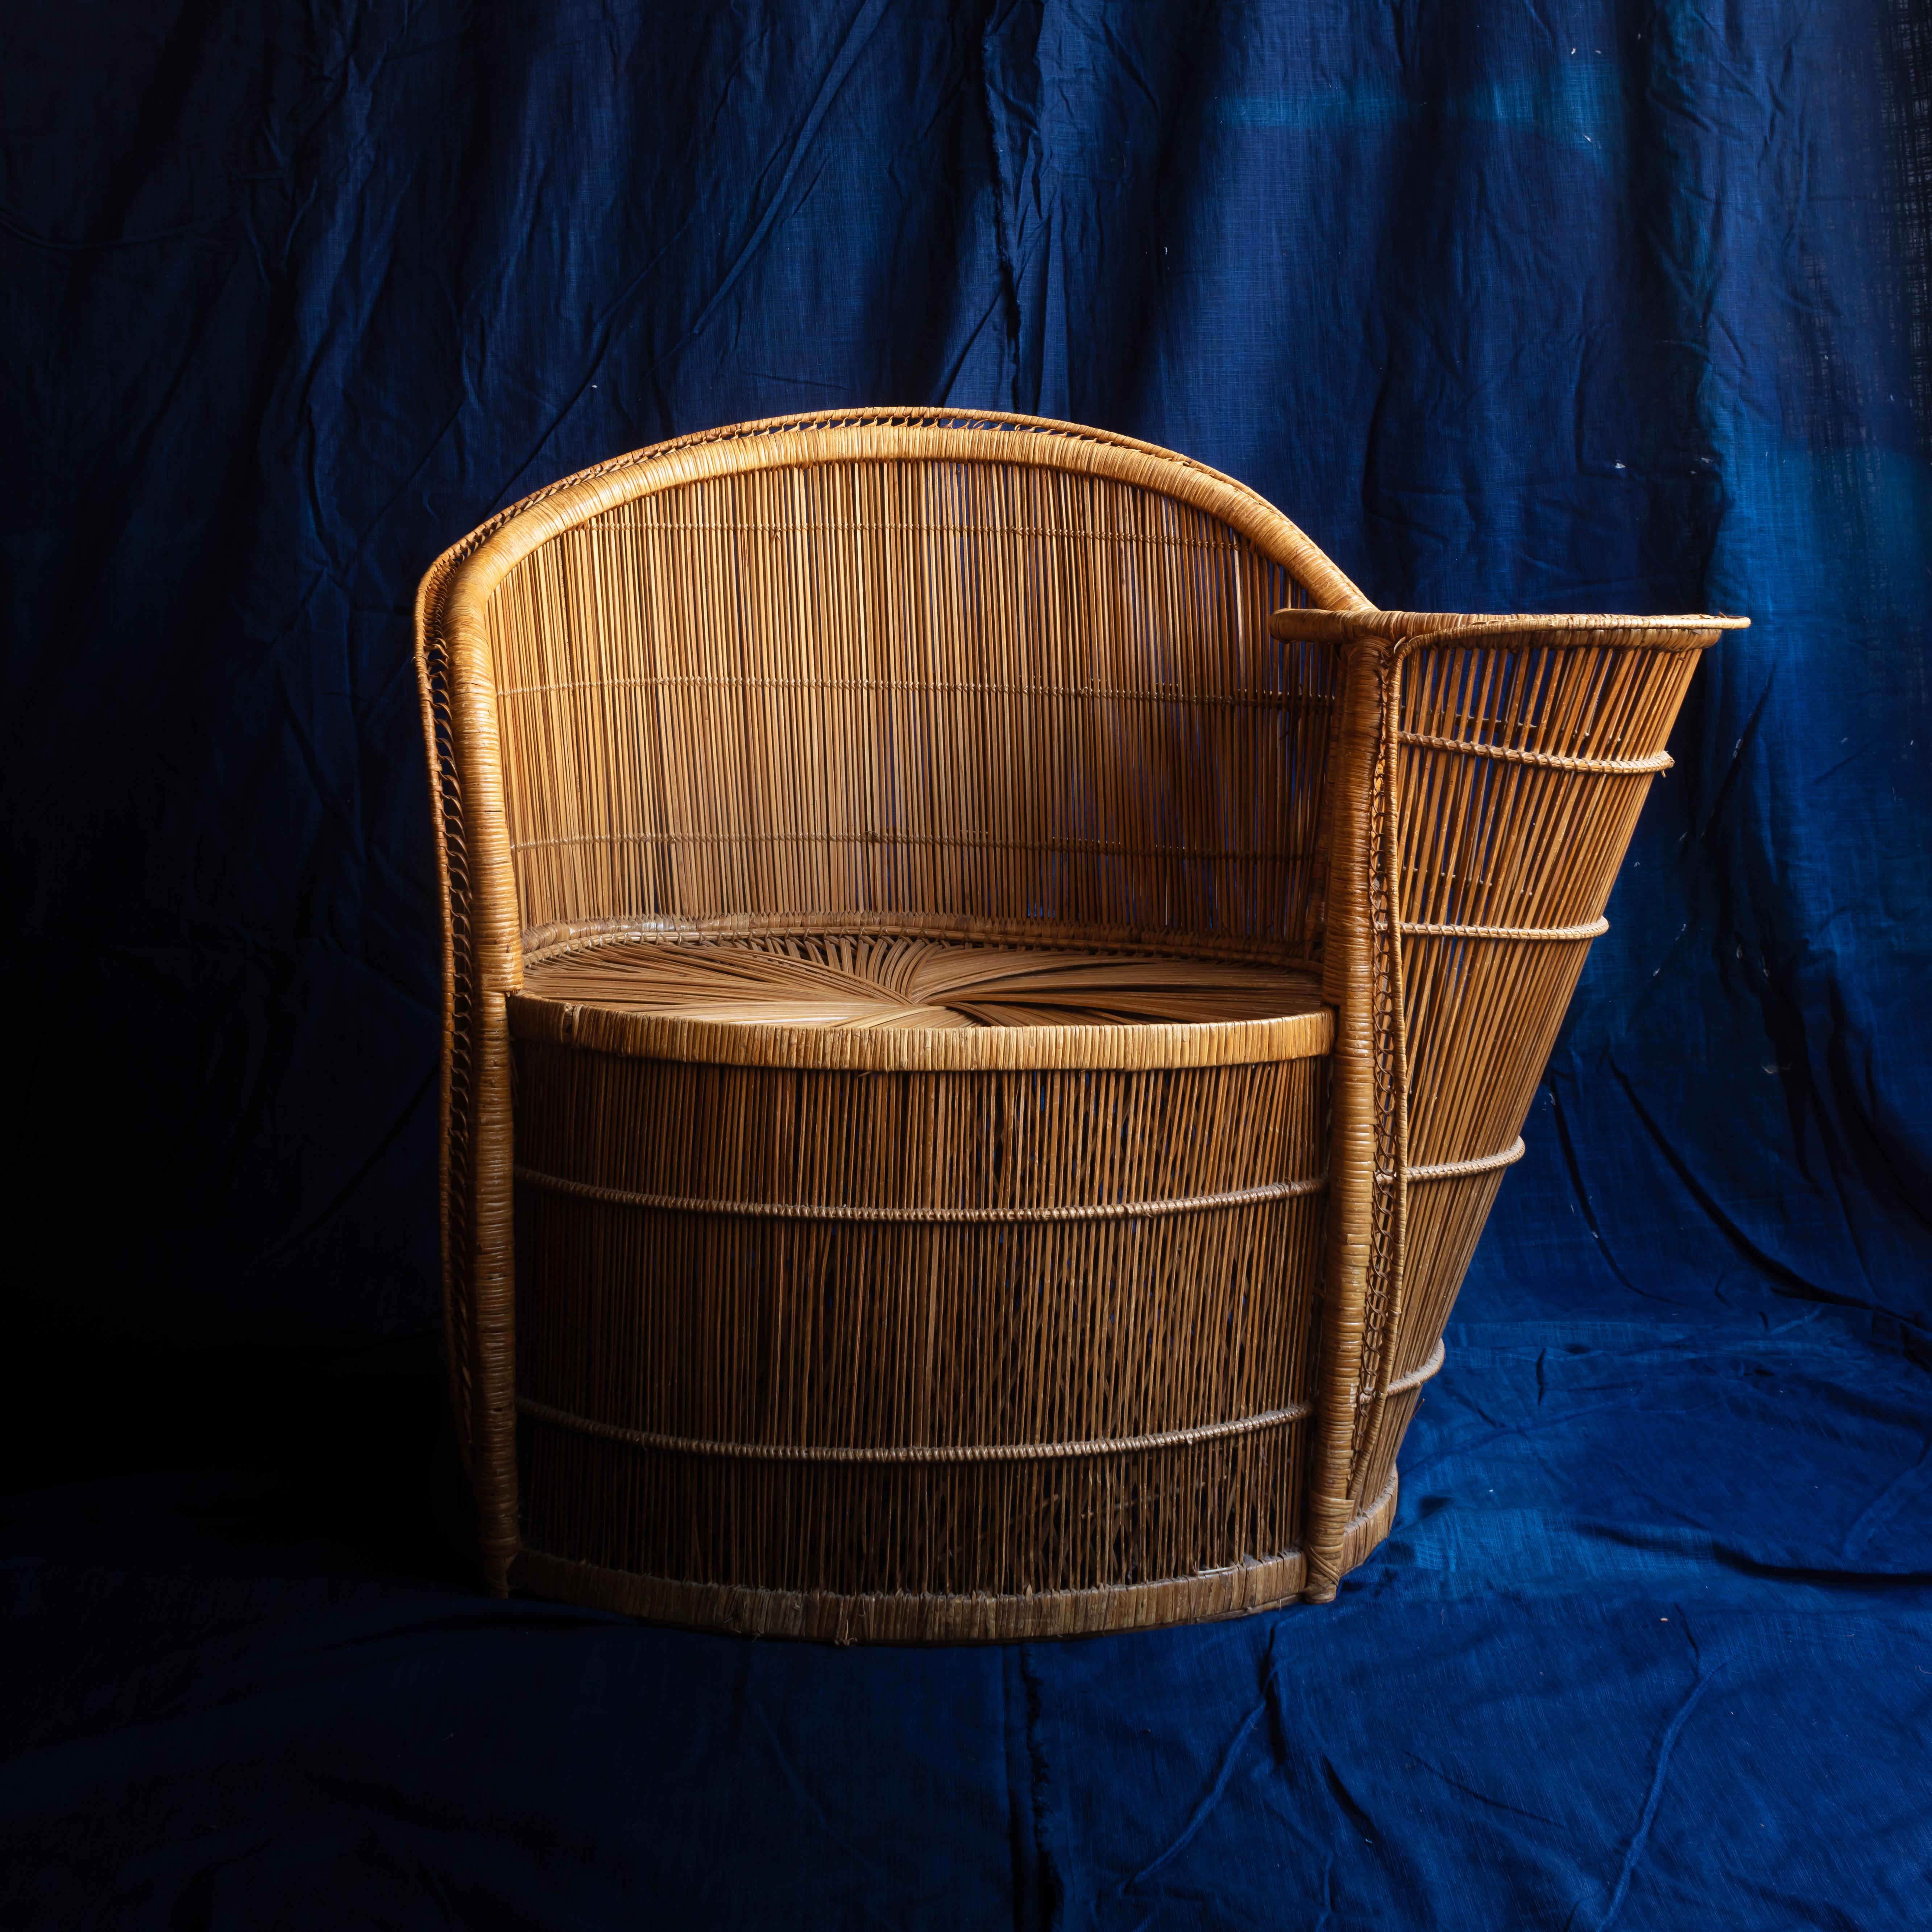 Charming rattan armchair with integral side table.
French c1960s 
Dimensions: Height: 78 x Width: 99 x Depth: 50cm